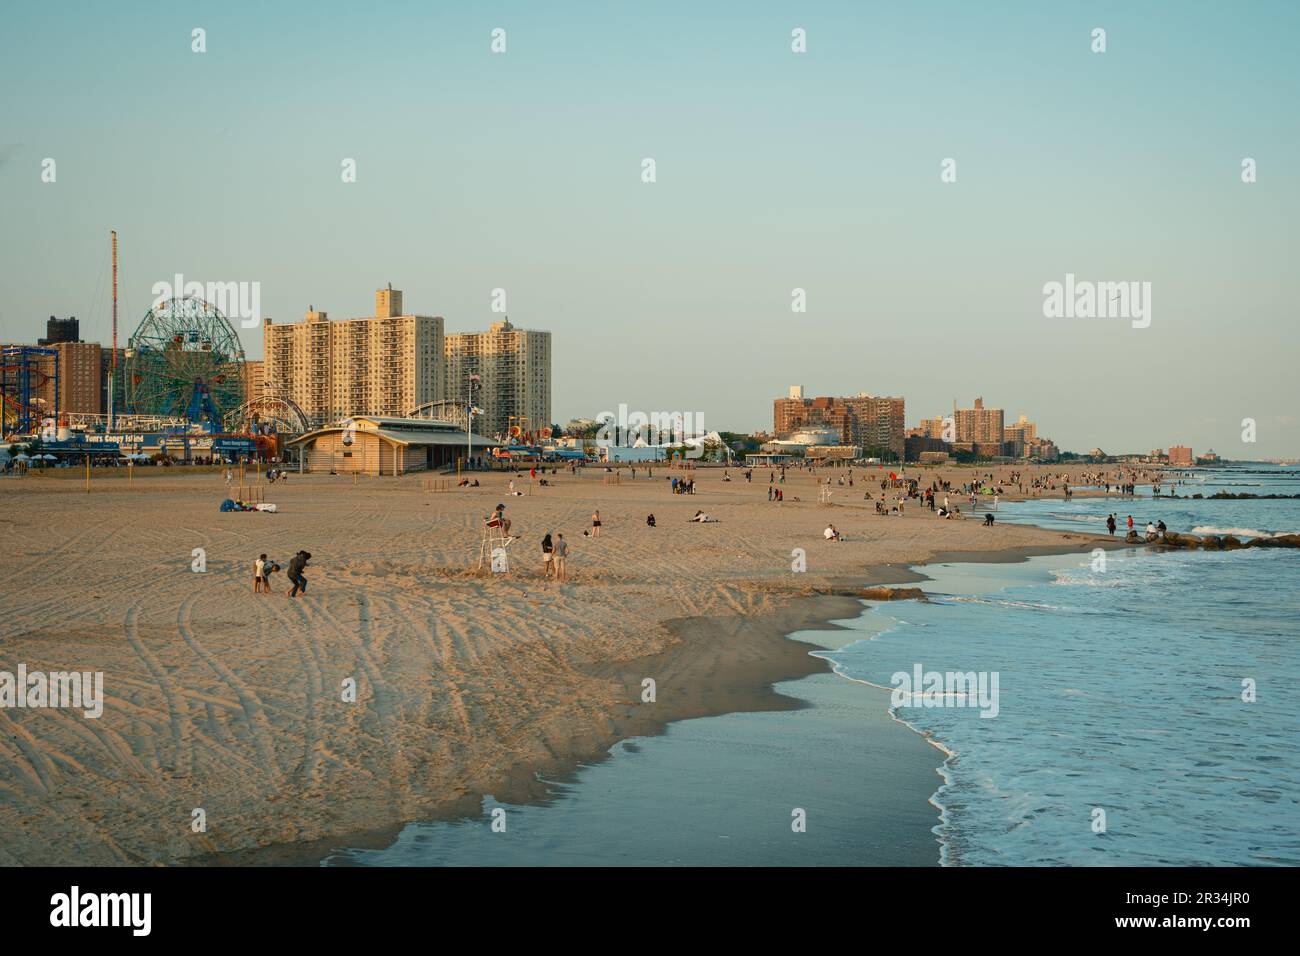 View of the beach in Coney Island, Brooklyn, New York Stock Photo